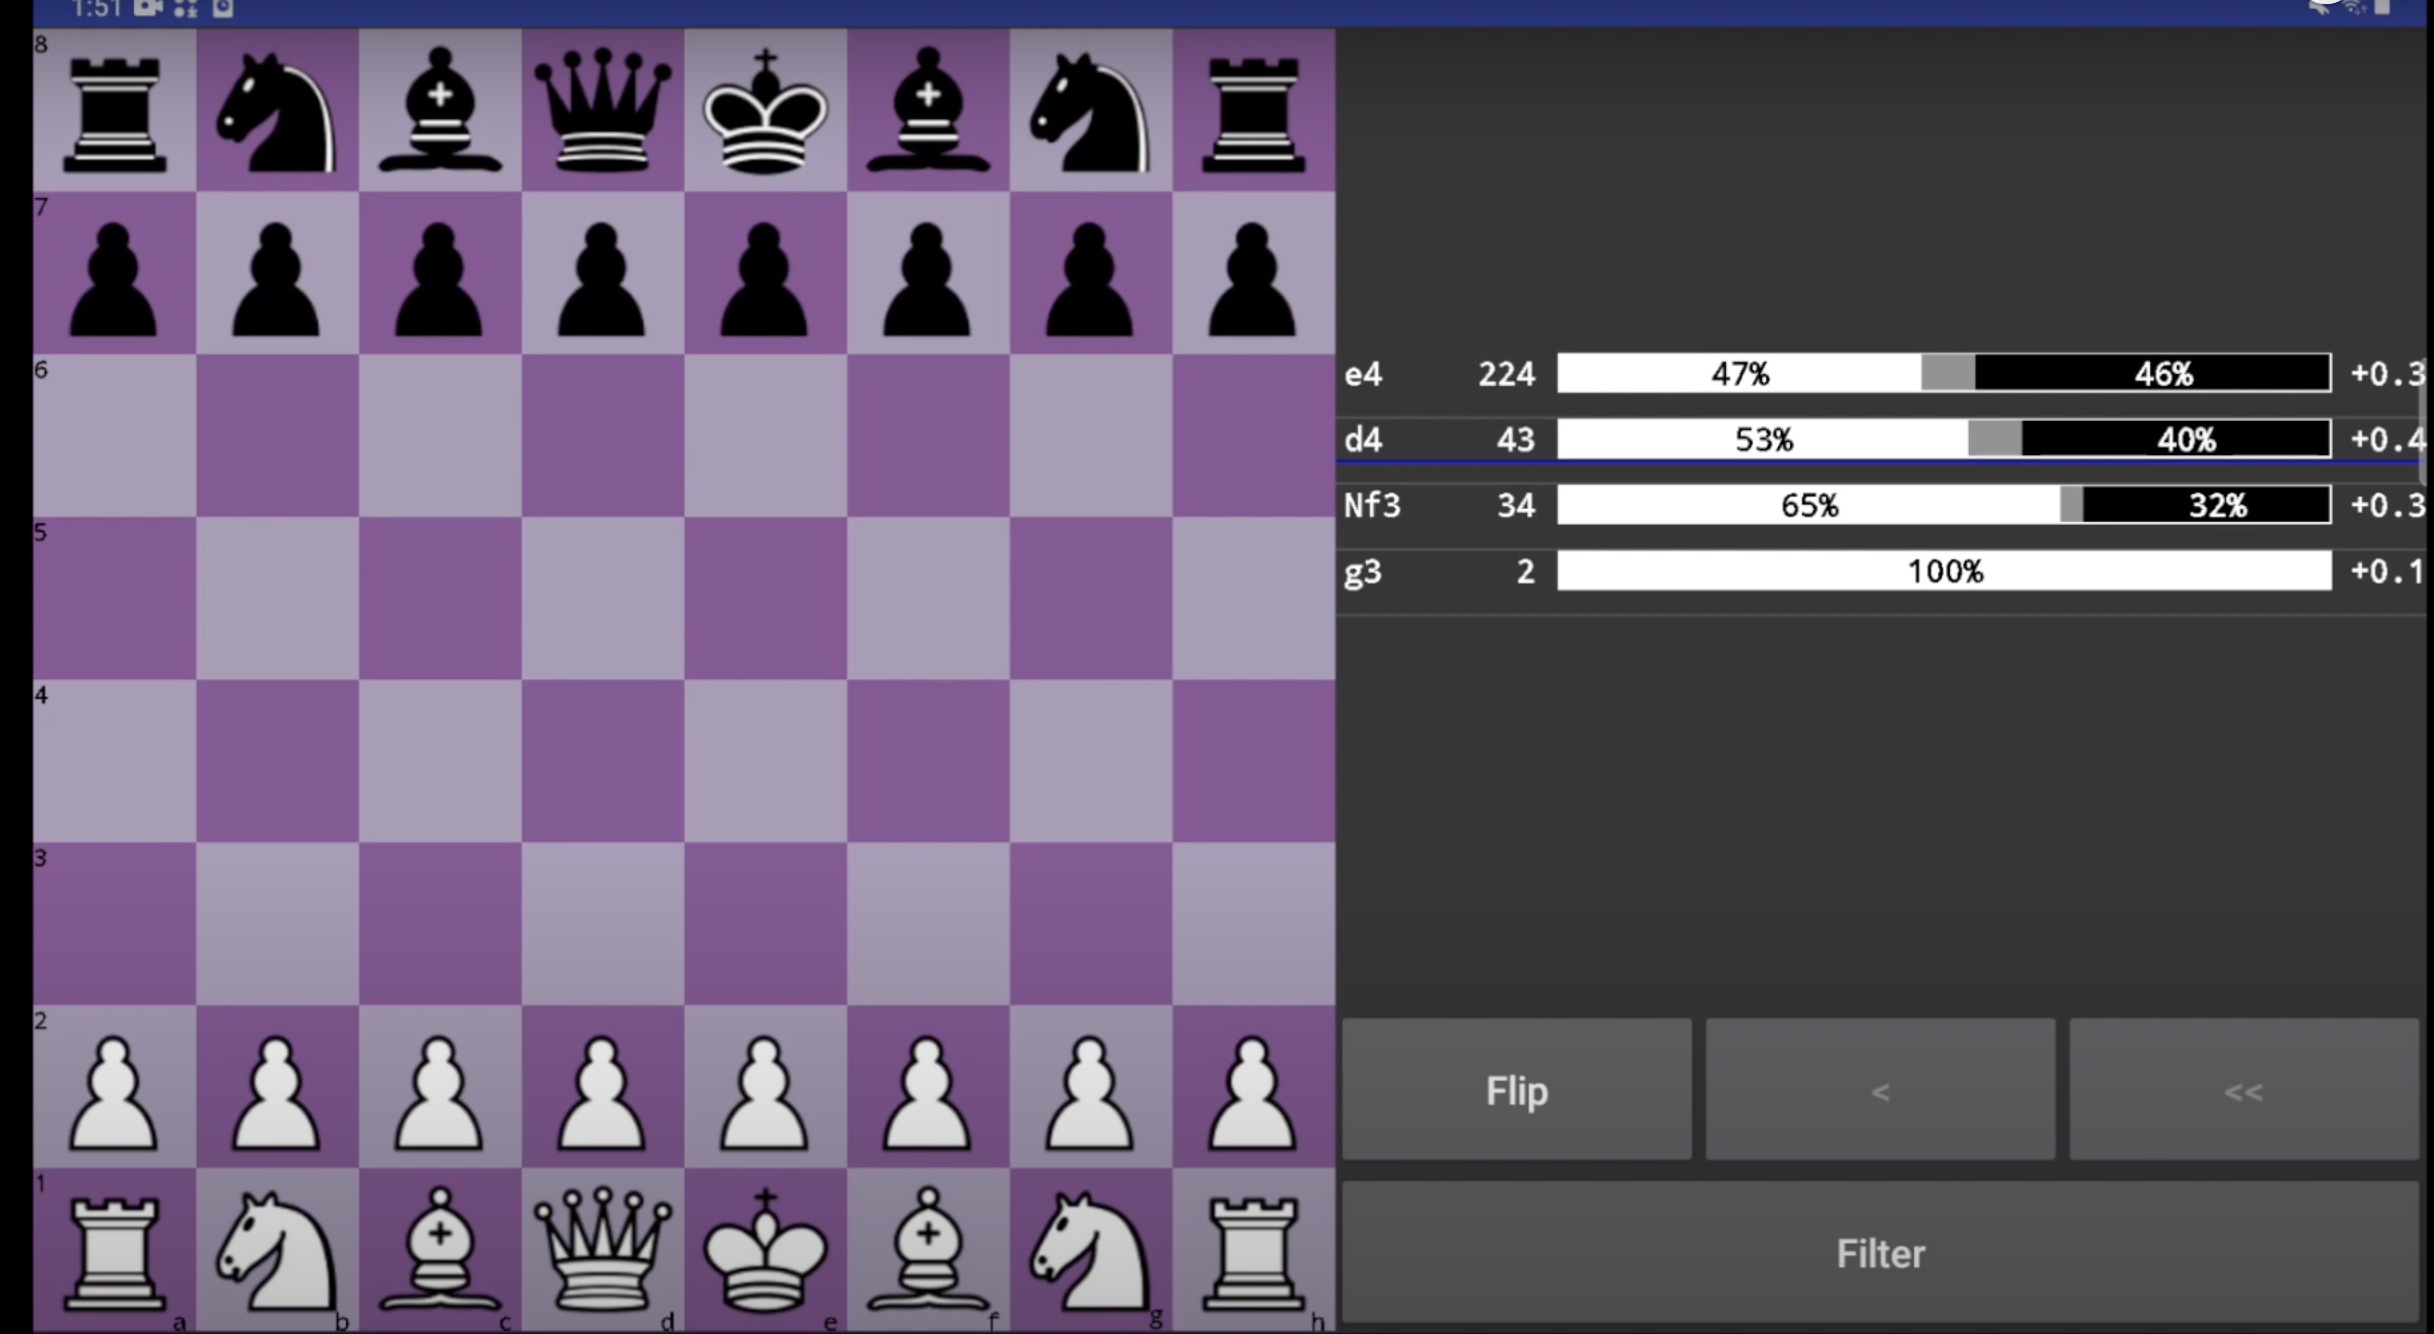 GitHub - felaube/chess-games-explorer: A web application that allows a  chess player to see a history of all the positions he reached in his games  played at chess.com or lichess.com